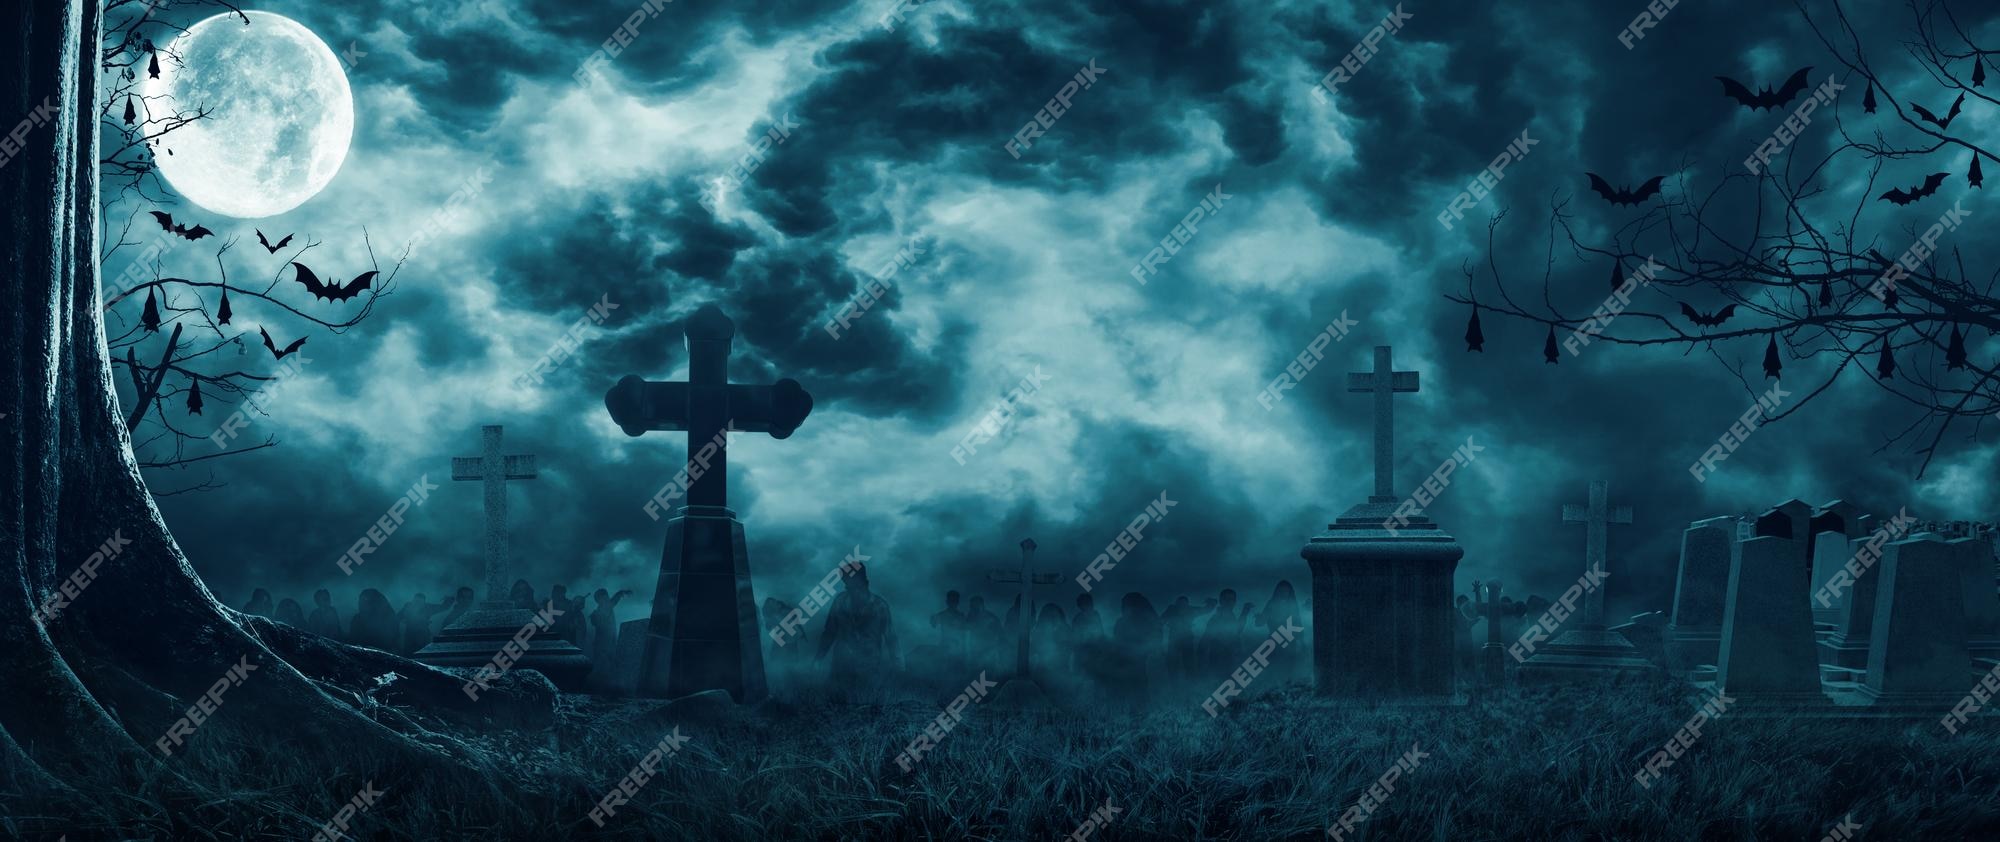 Premium Photo | Zombie rising out of a graveyard cemetery in spooky scary  dark night full moon bats on dead tree holiday event halloween banner  background concept